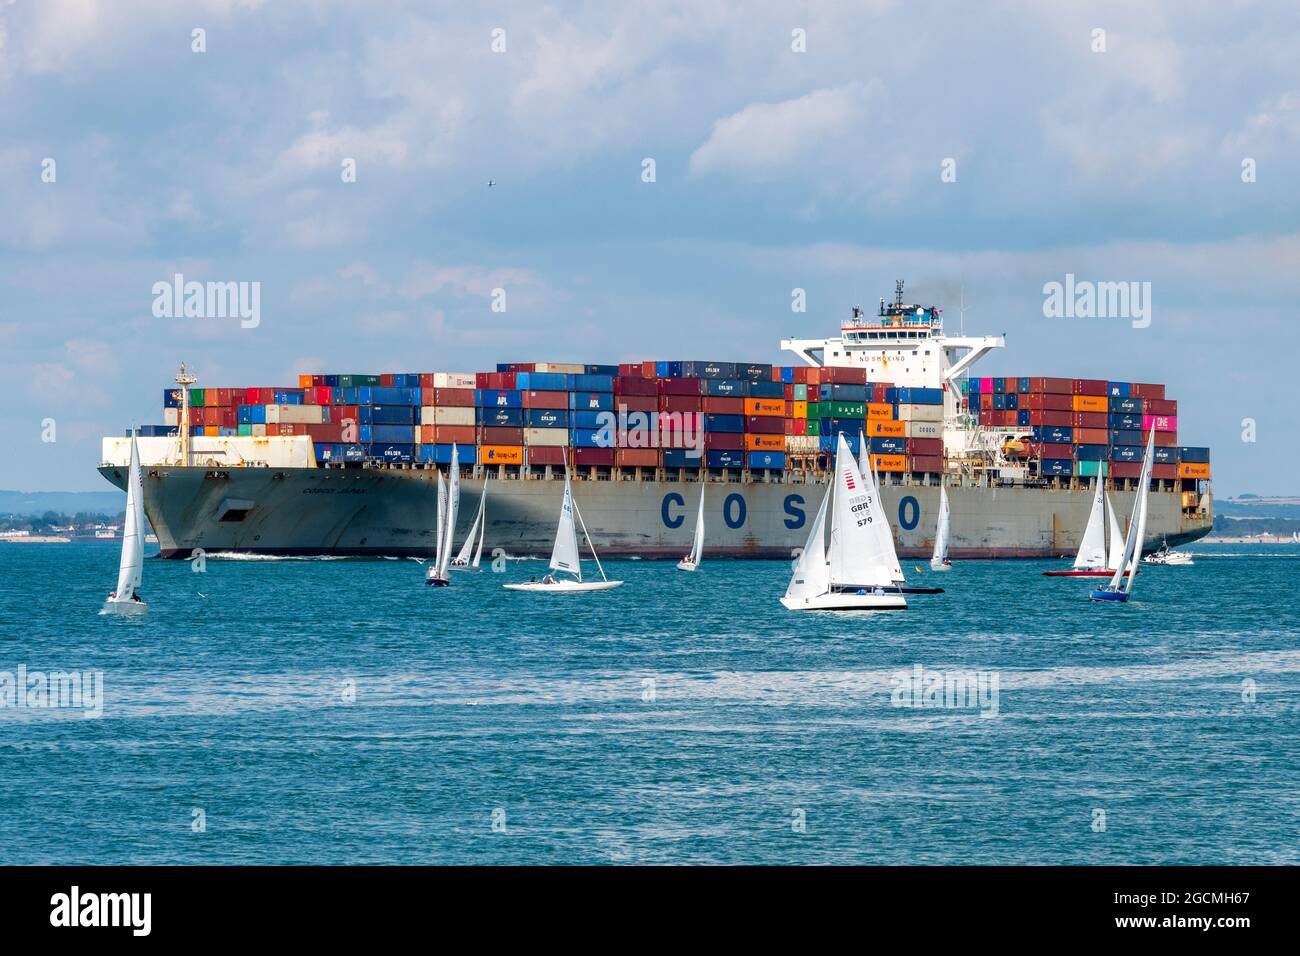 cowes week, nave container a solent, nave container vicino a yacht, nave container nel canale della spina, nave container in arrivo a solent southampton. Foto Stock